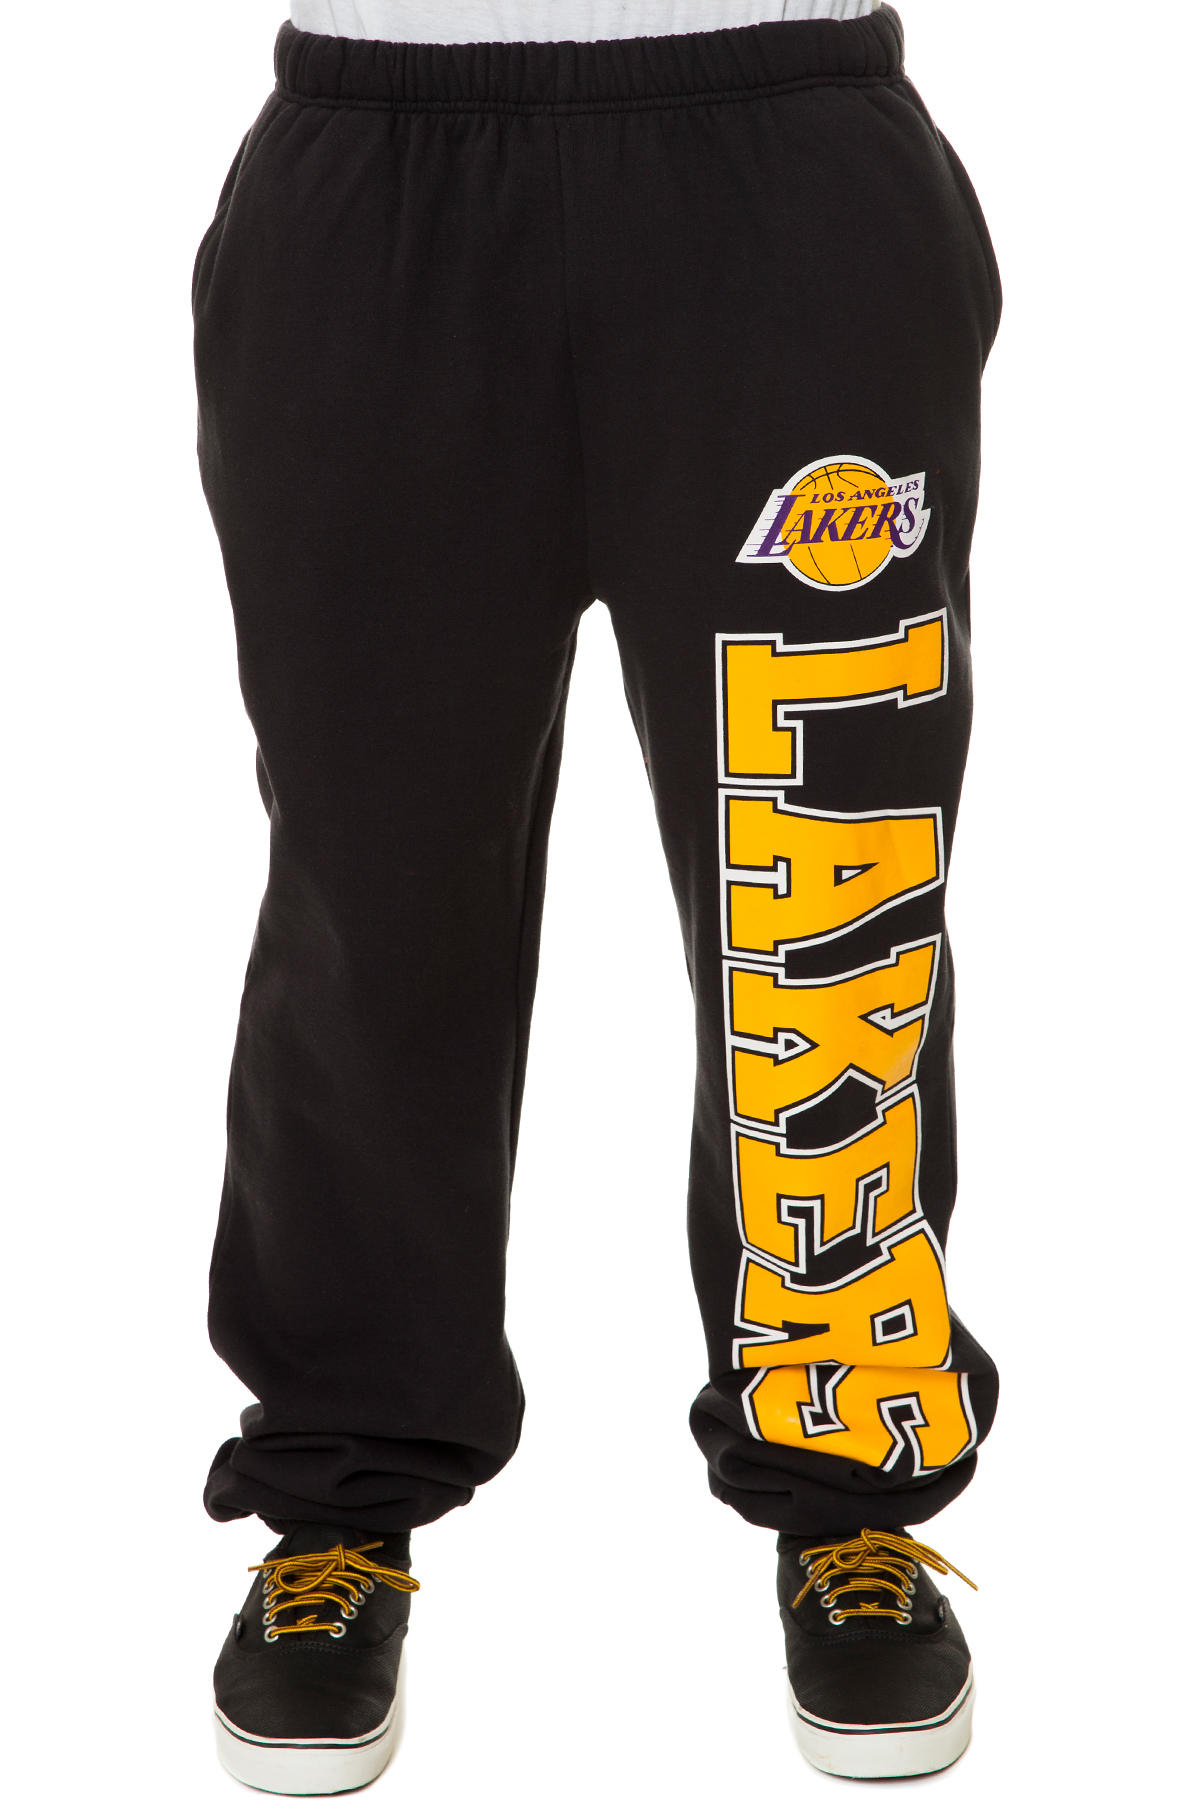 Mitchell & Ness The La Lakers Sweatpants in Black for Men - Lyst